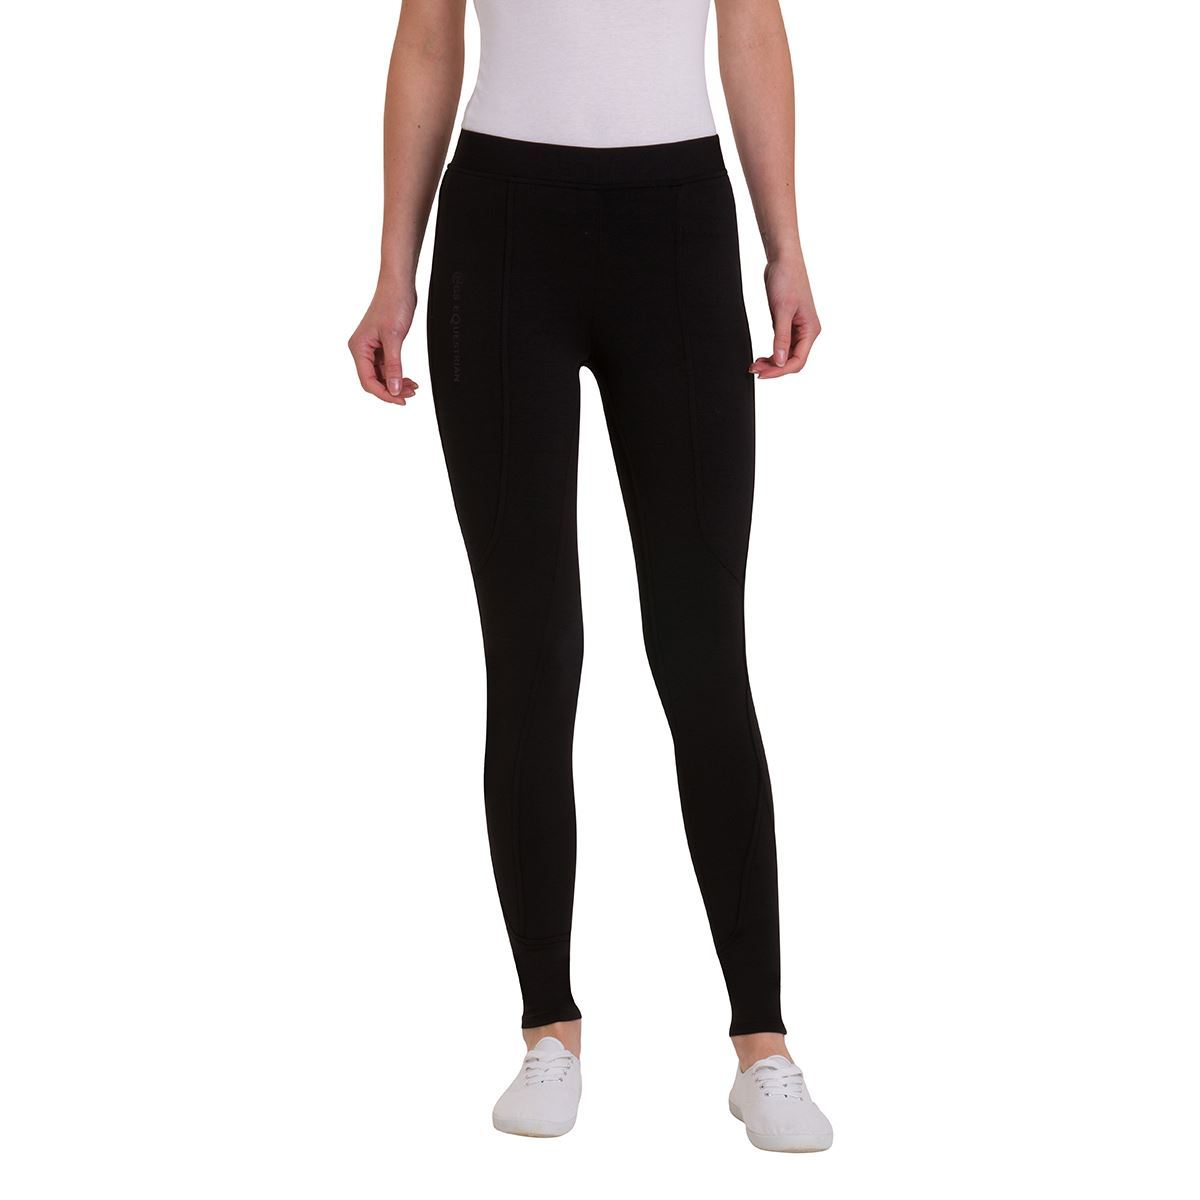 GS Equestrian Becca Ladies Silicone Riding Tights